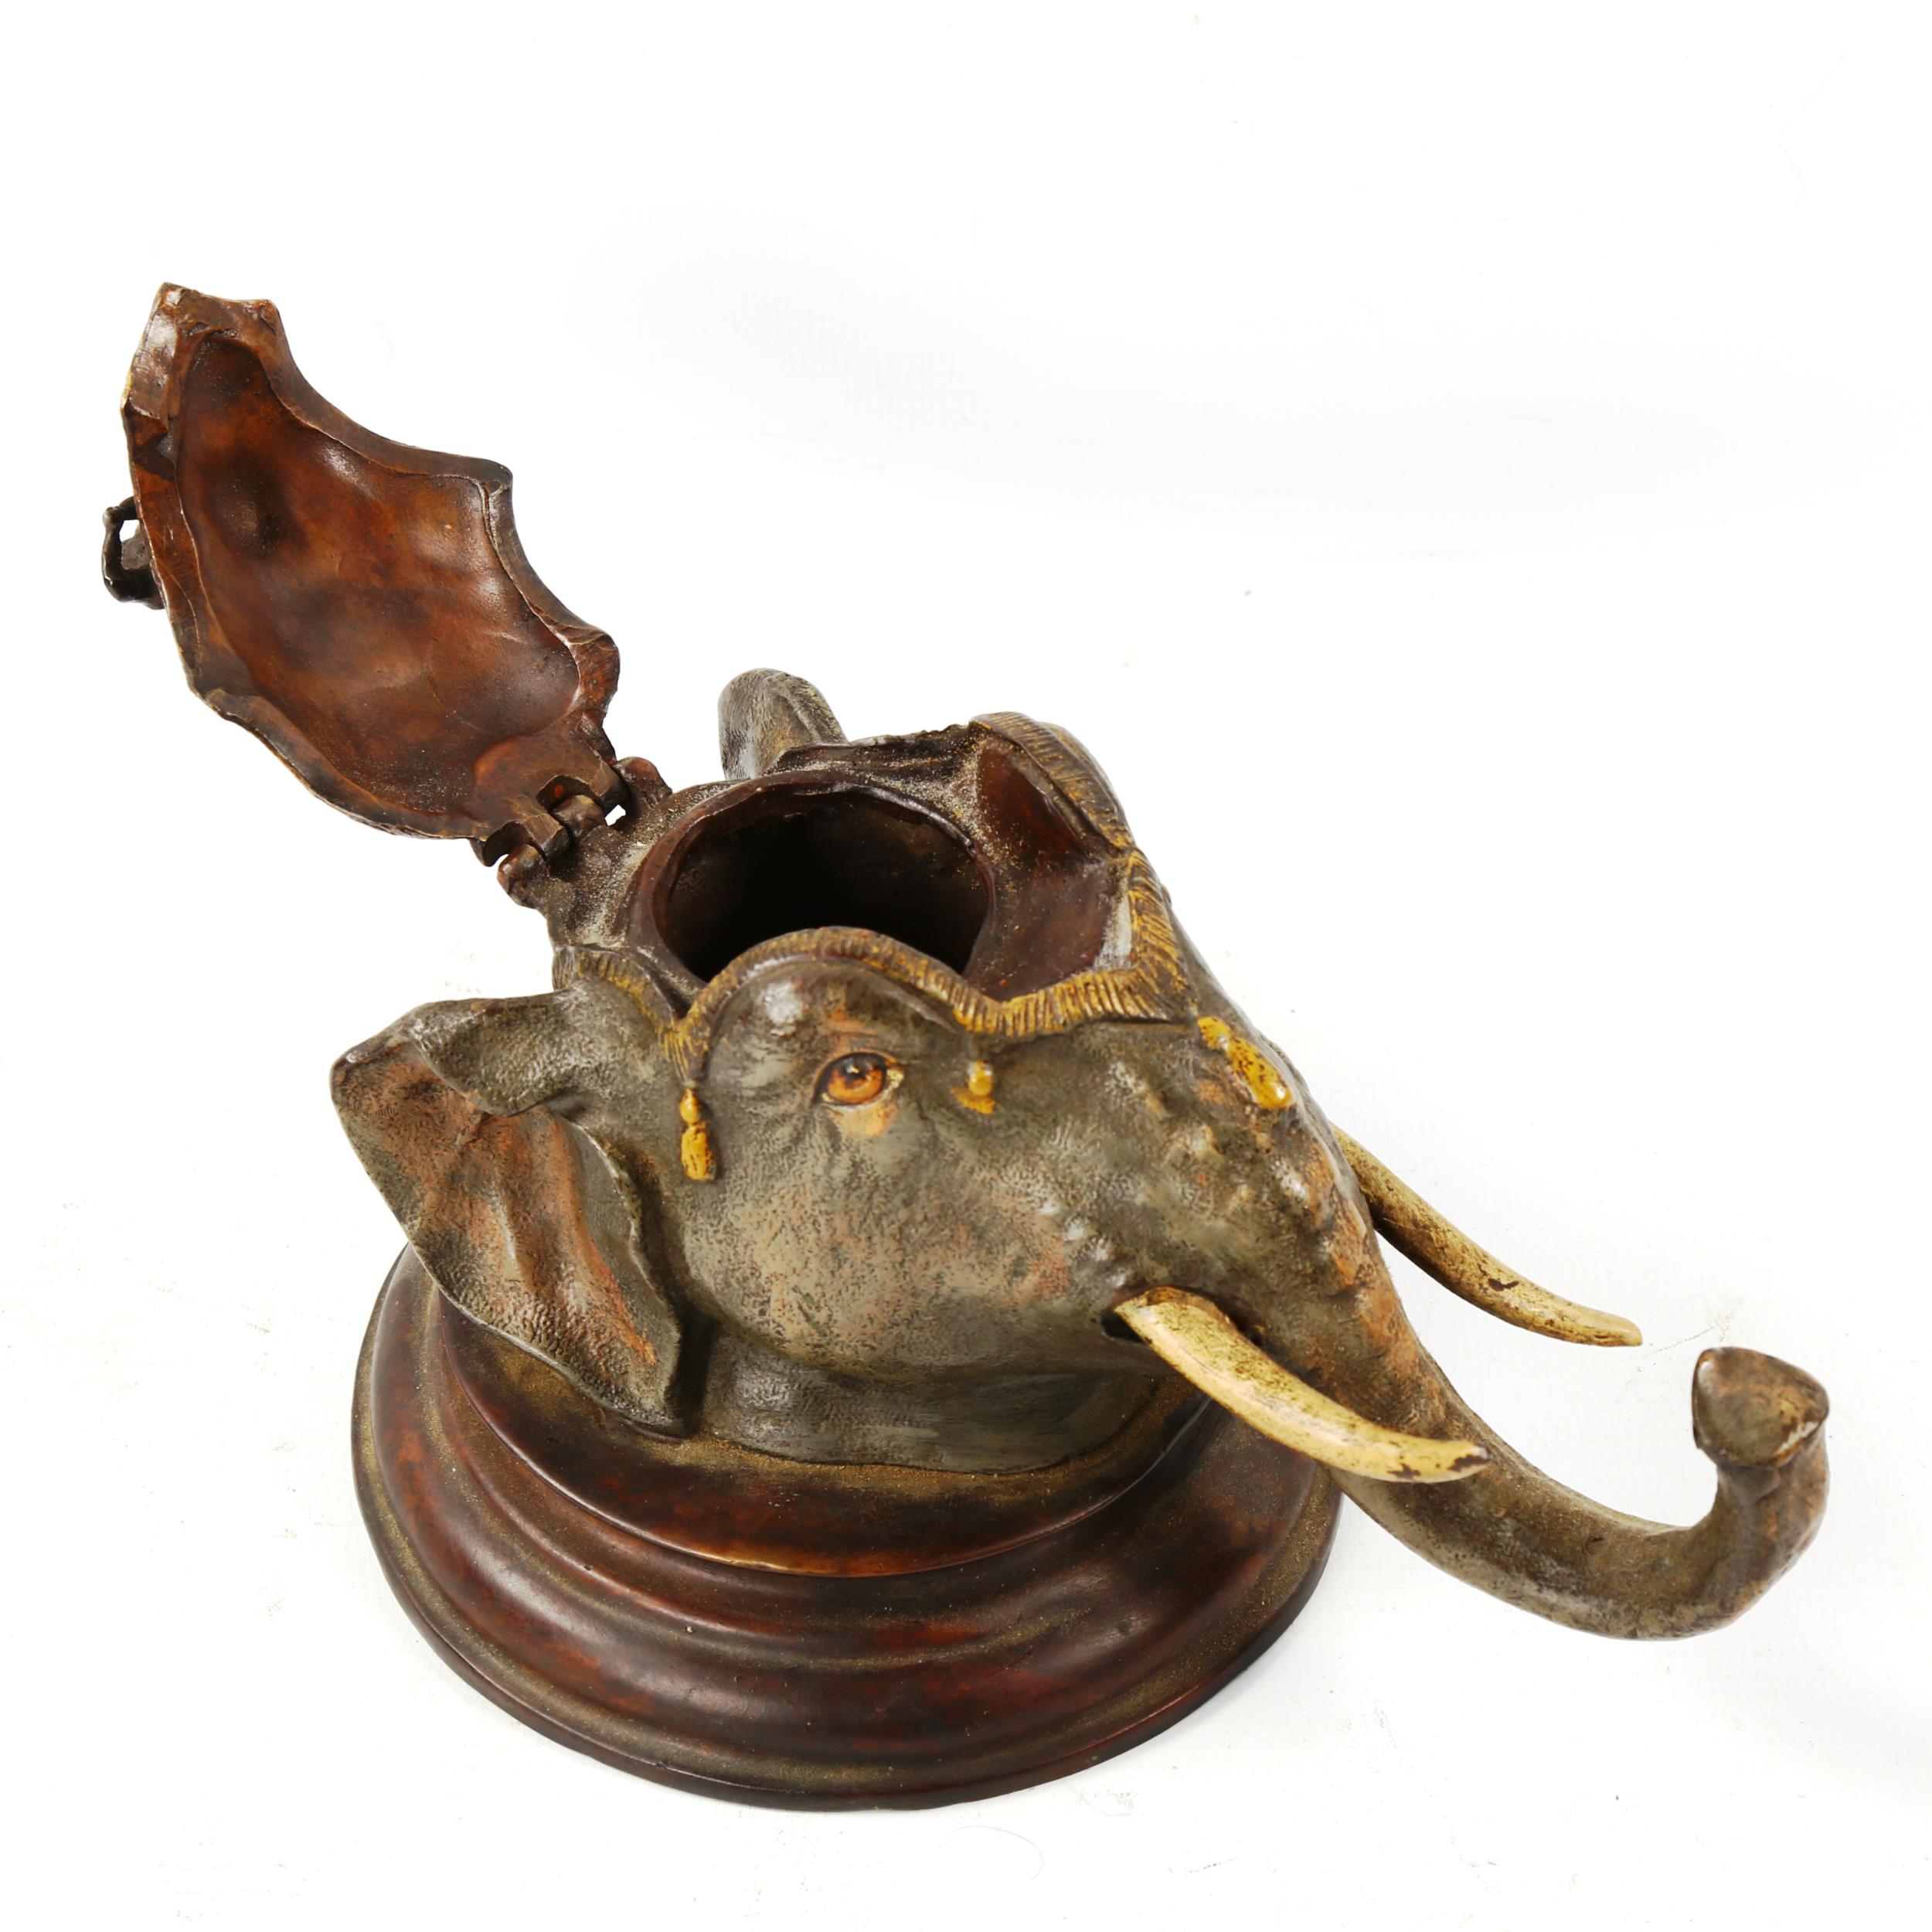 Bergmann style cold painted bronze inkwell, in the form of an elephant head with monkey finial, - Image 2 of 3